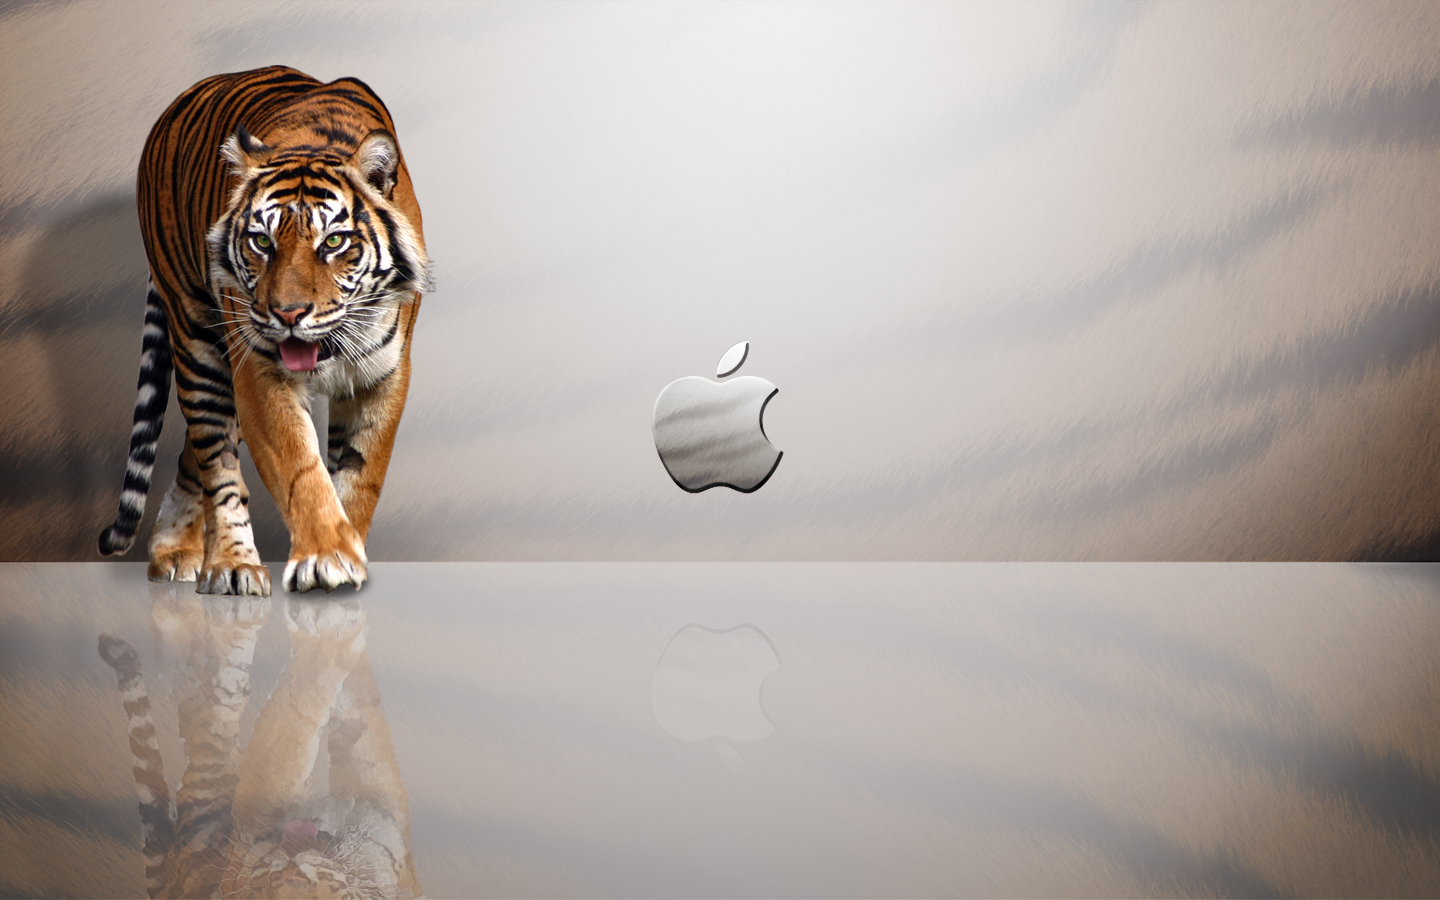 Cool Wallpapers Pics: Cool Wallpapers For Mac